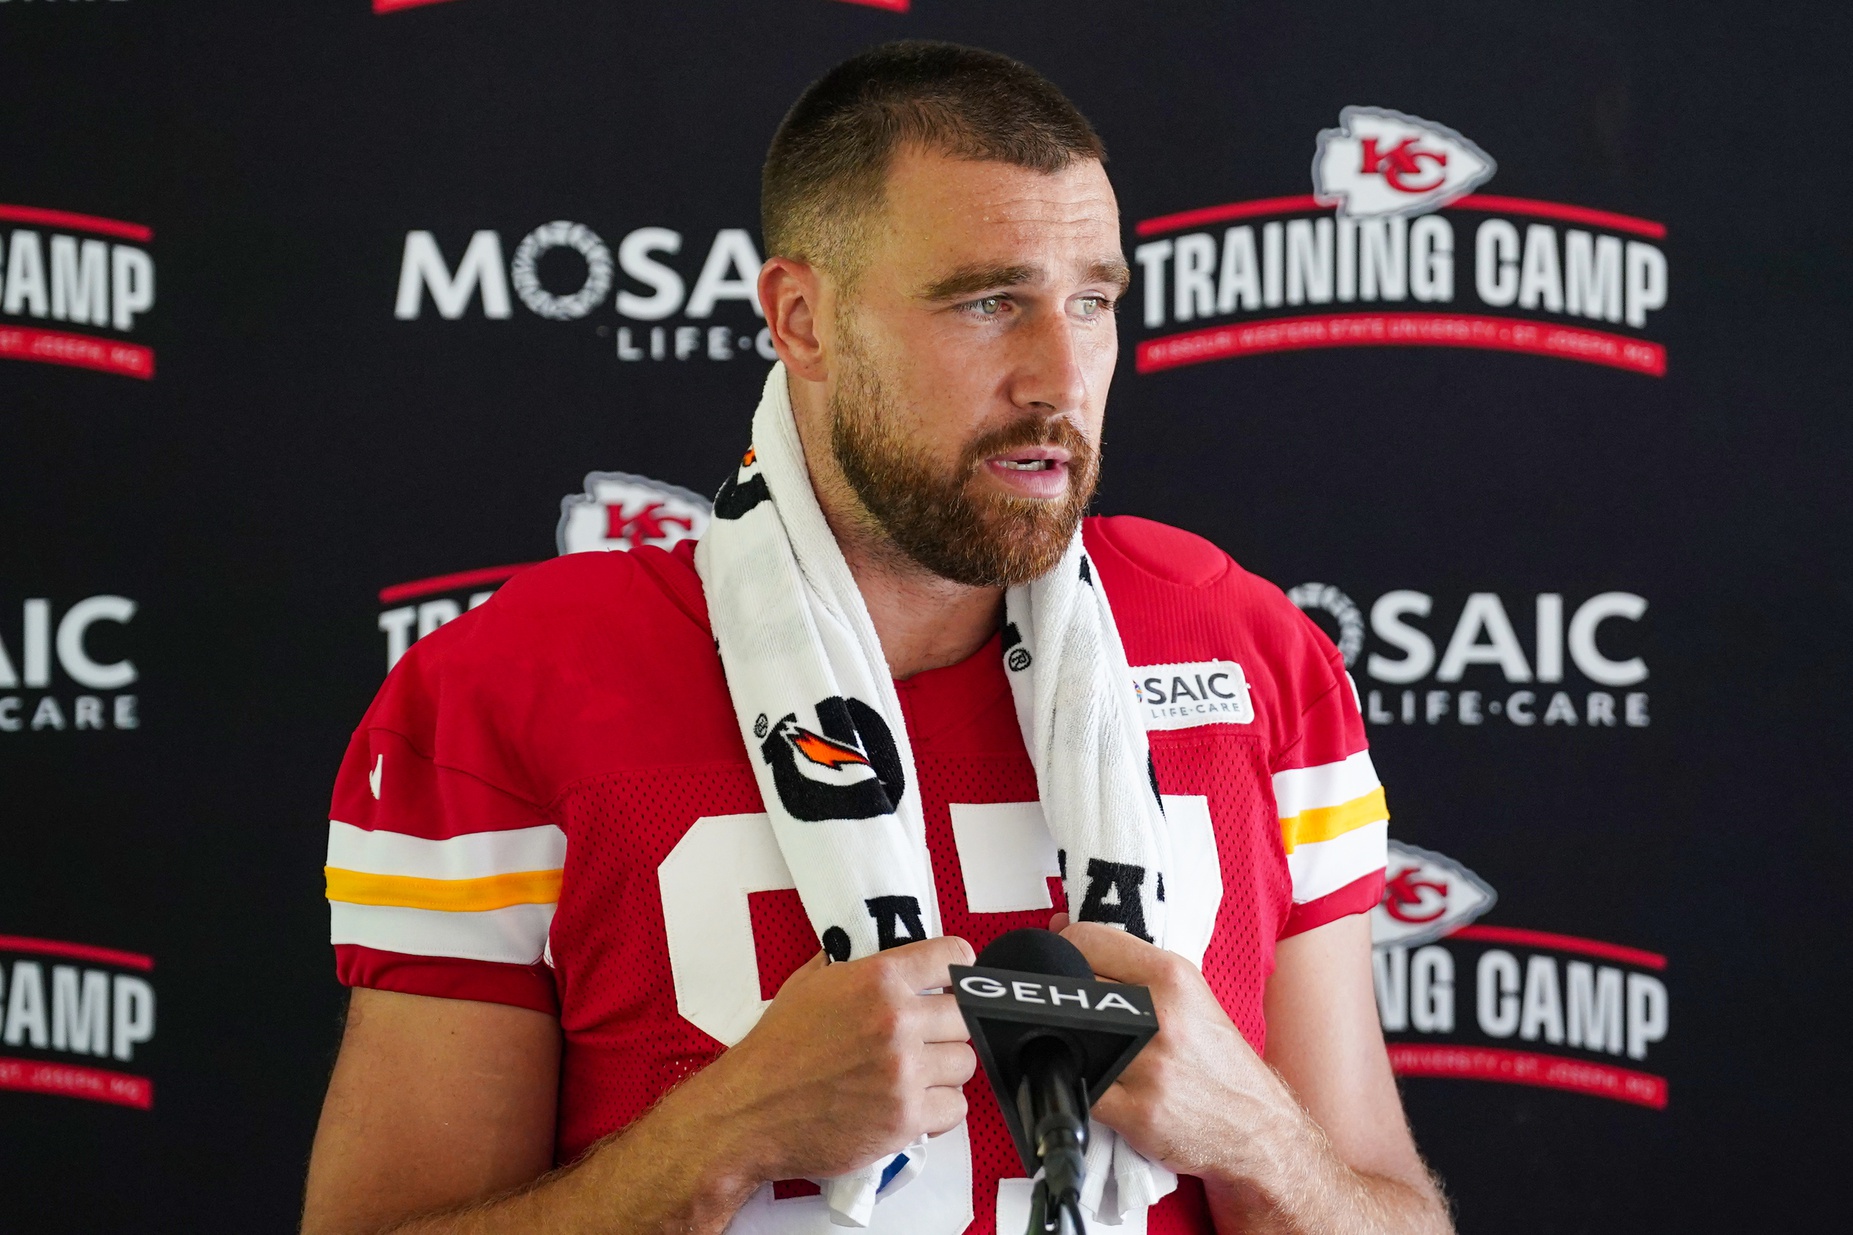 Travis Kelce - Let's go take care of some